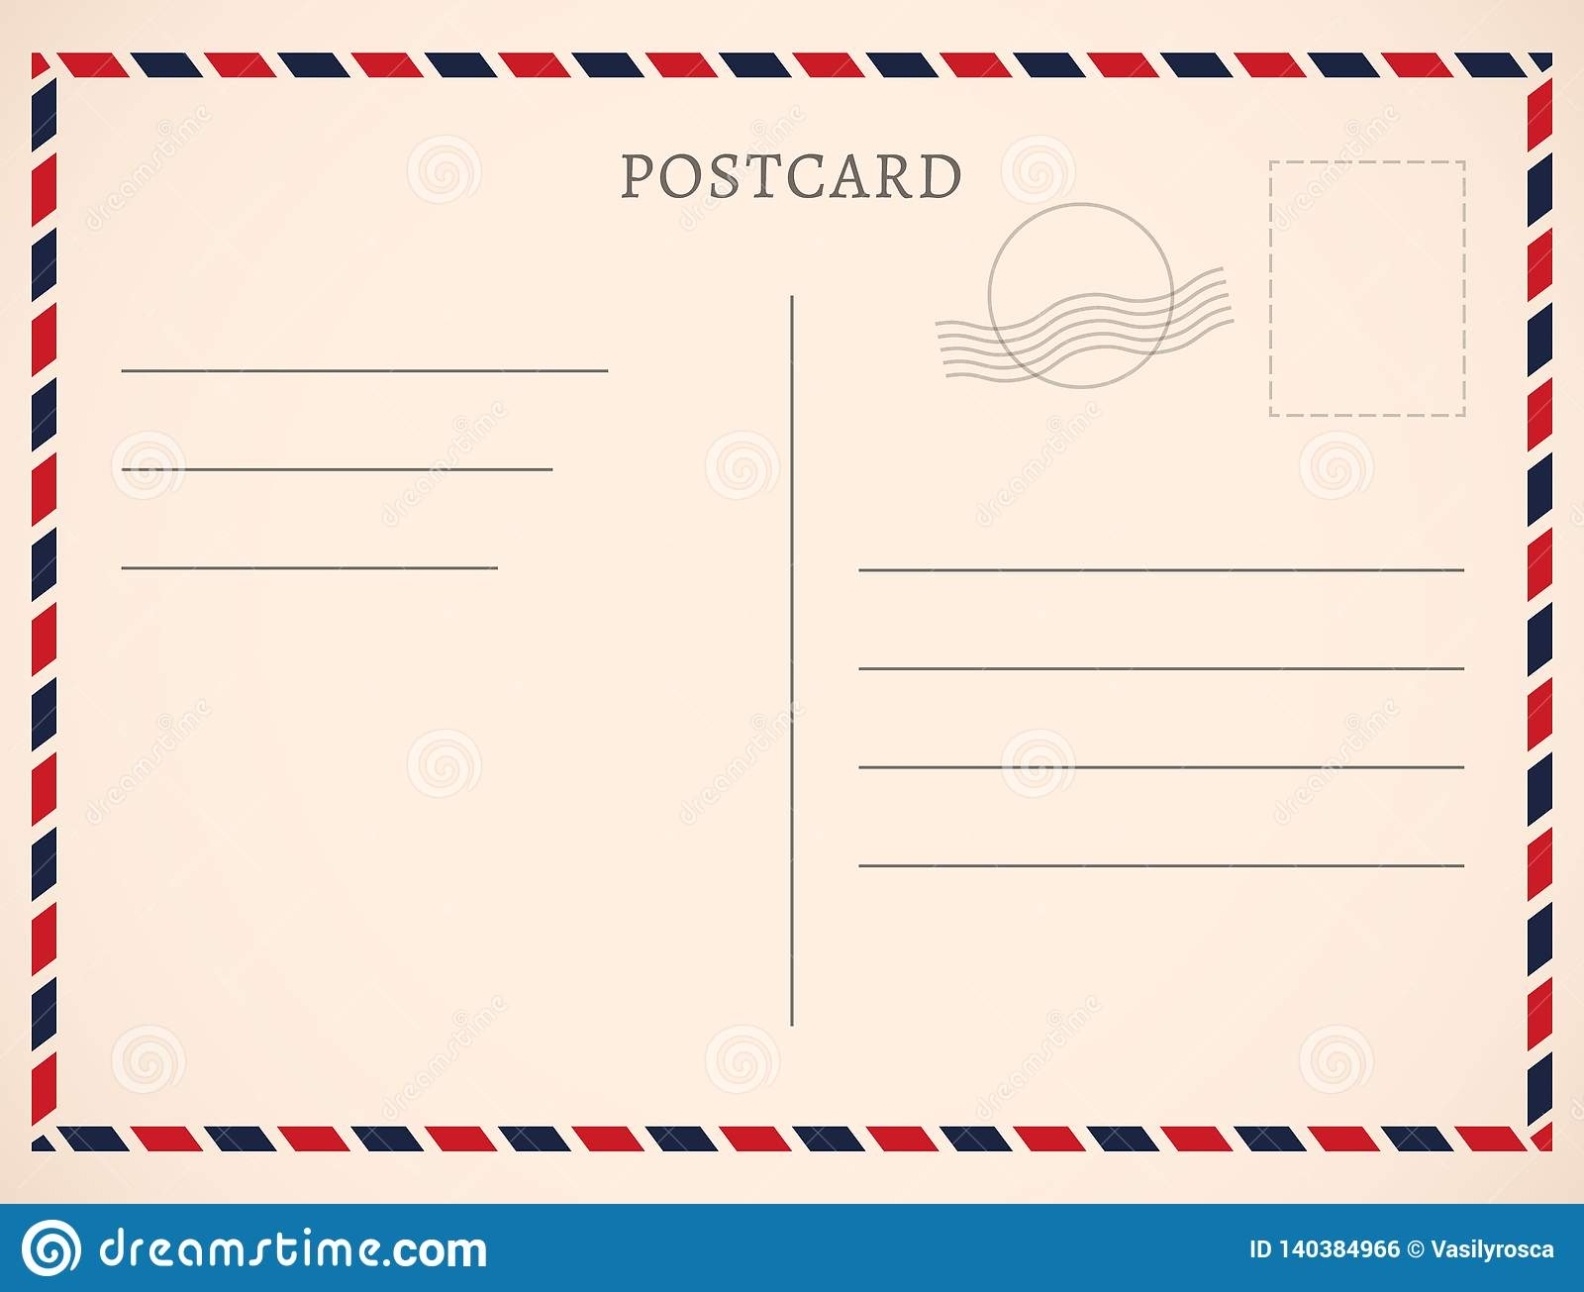 Postcard Template Paper White Texture. Vector Postcard Empty Mail Stamp With Regard To Postcard Mailing Template